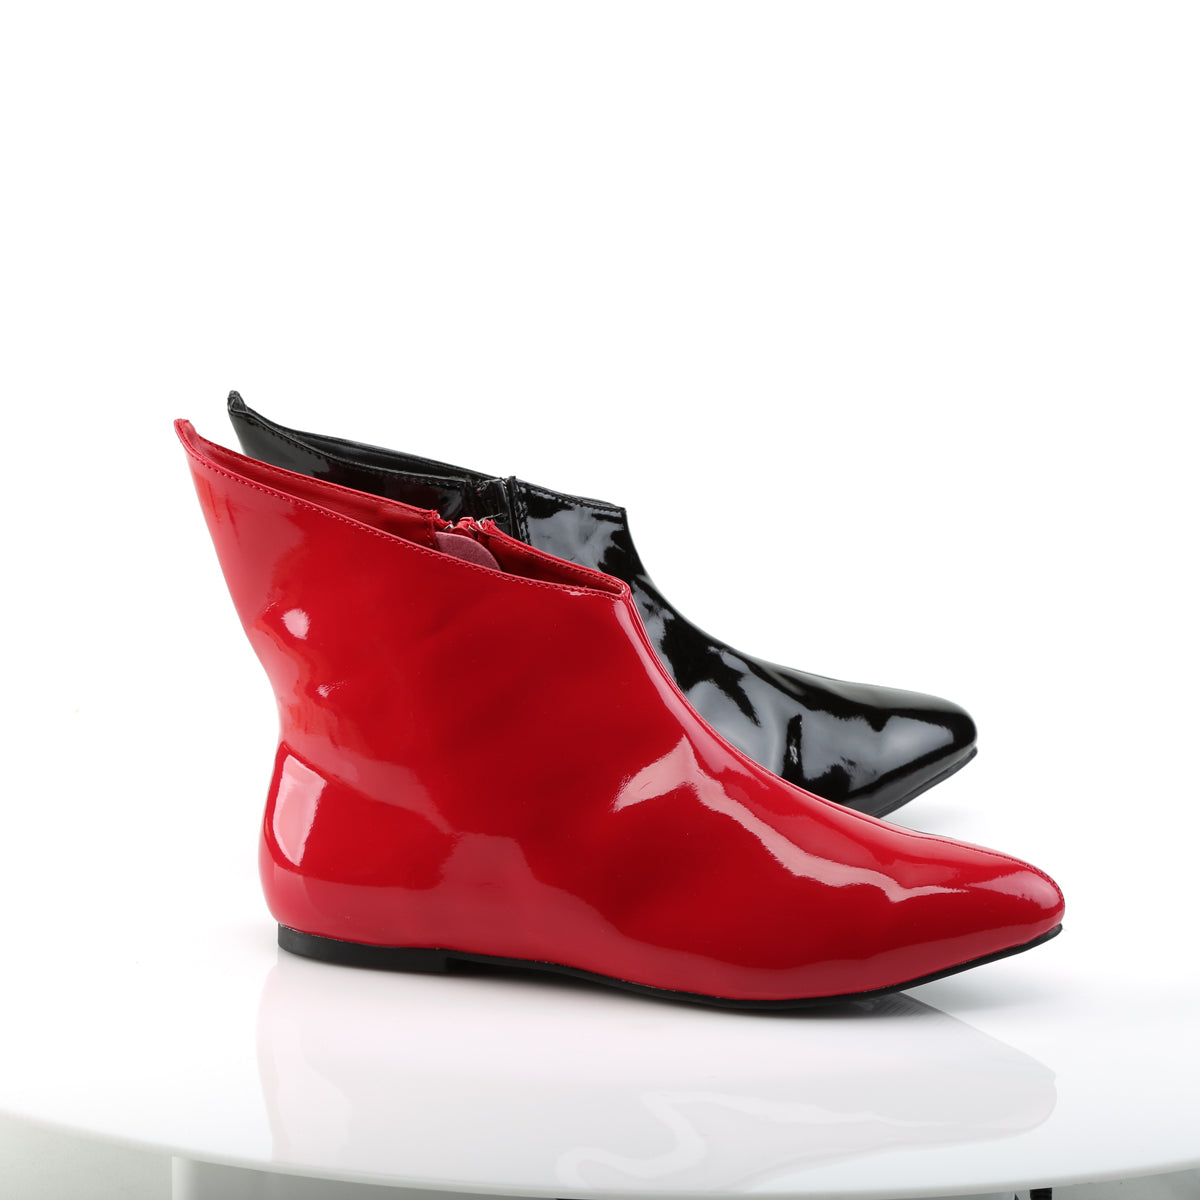 VAIL-152HQ Funtasma Black and Red Women's Costume Shoes Funtasma Costume Shoes Fancy Dress